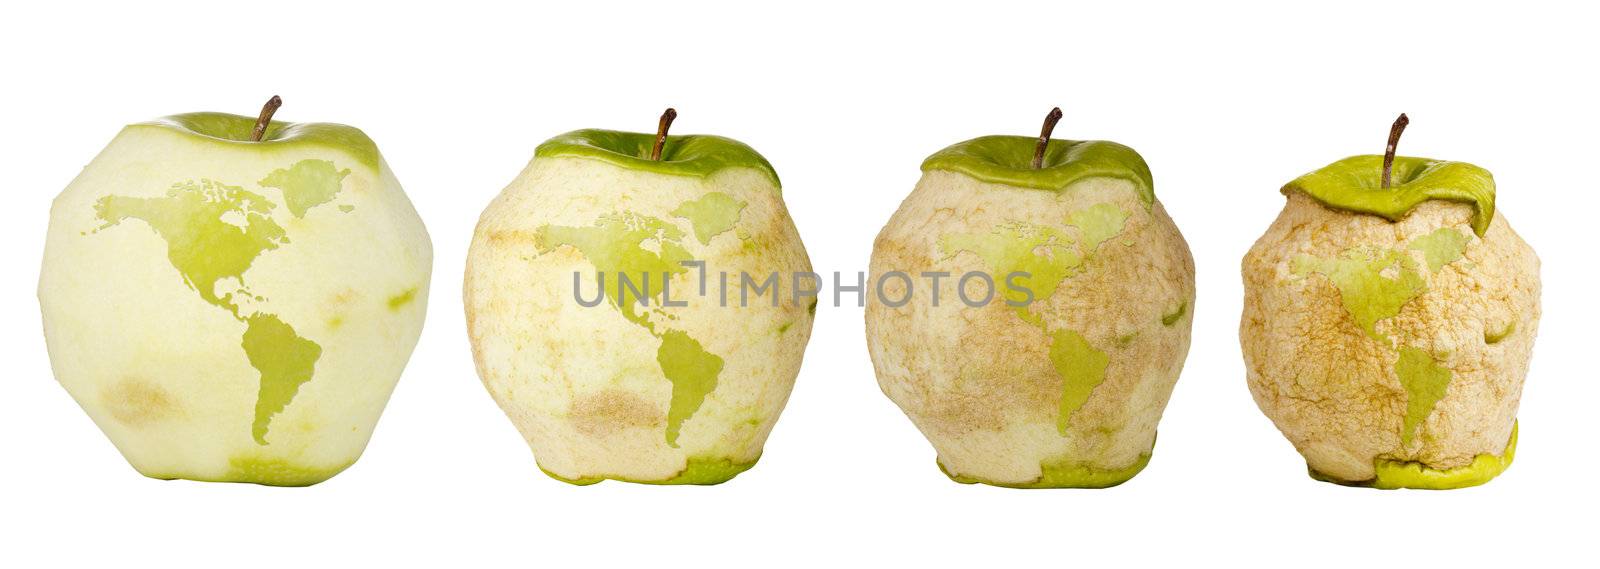 Green apple with a carving of the world map shown four times over a timespan of its deterioration.